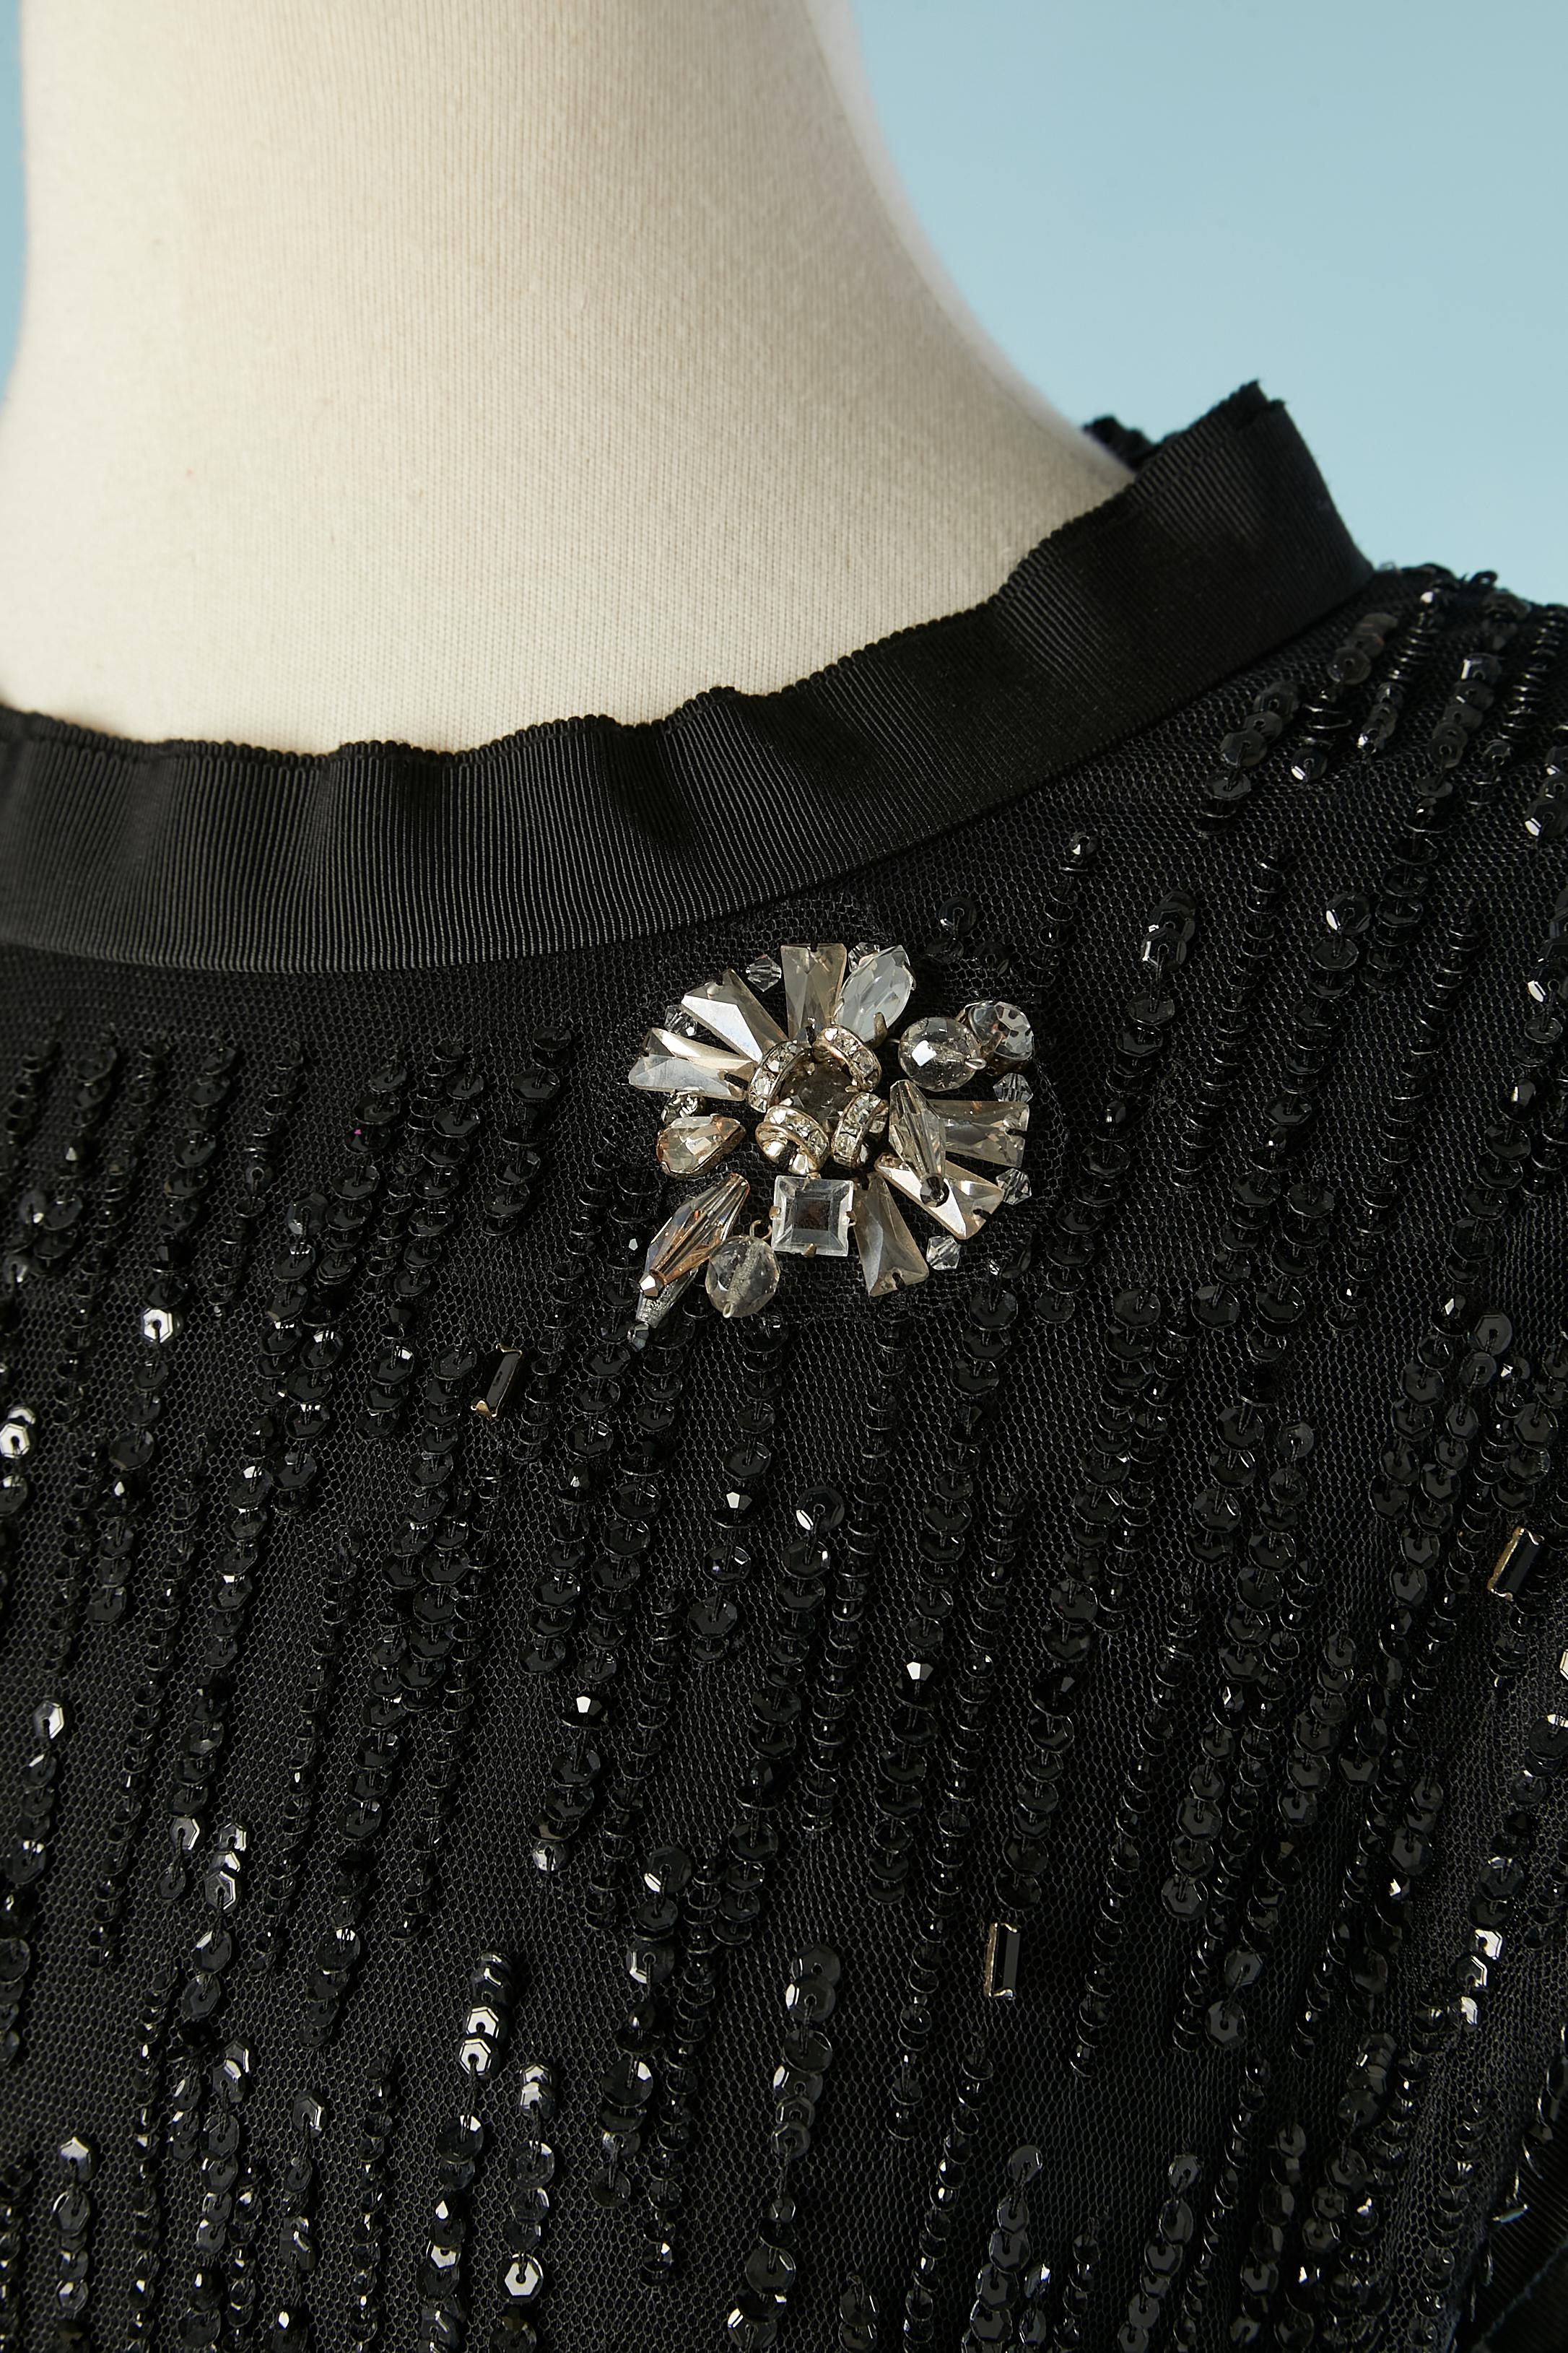 Black sequin dress on a tulle base with rhinestone brooches. Collar, armhole and bottom edge in black gros-grain.
Fabric composition: 
Main fabric: 95% rayon, 5% silk. Lining: 100% polyamide.
Gros-grain: 100% rayon. Sequins: 100% polyvinyl chloride.